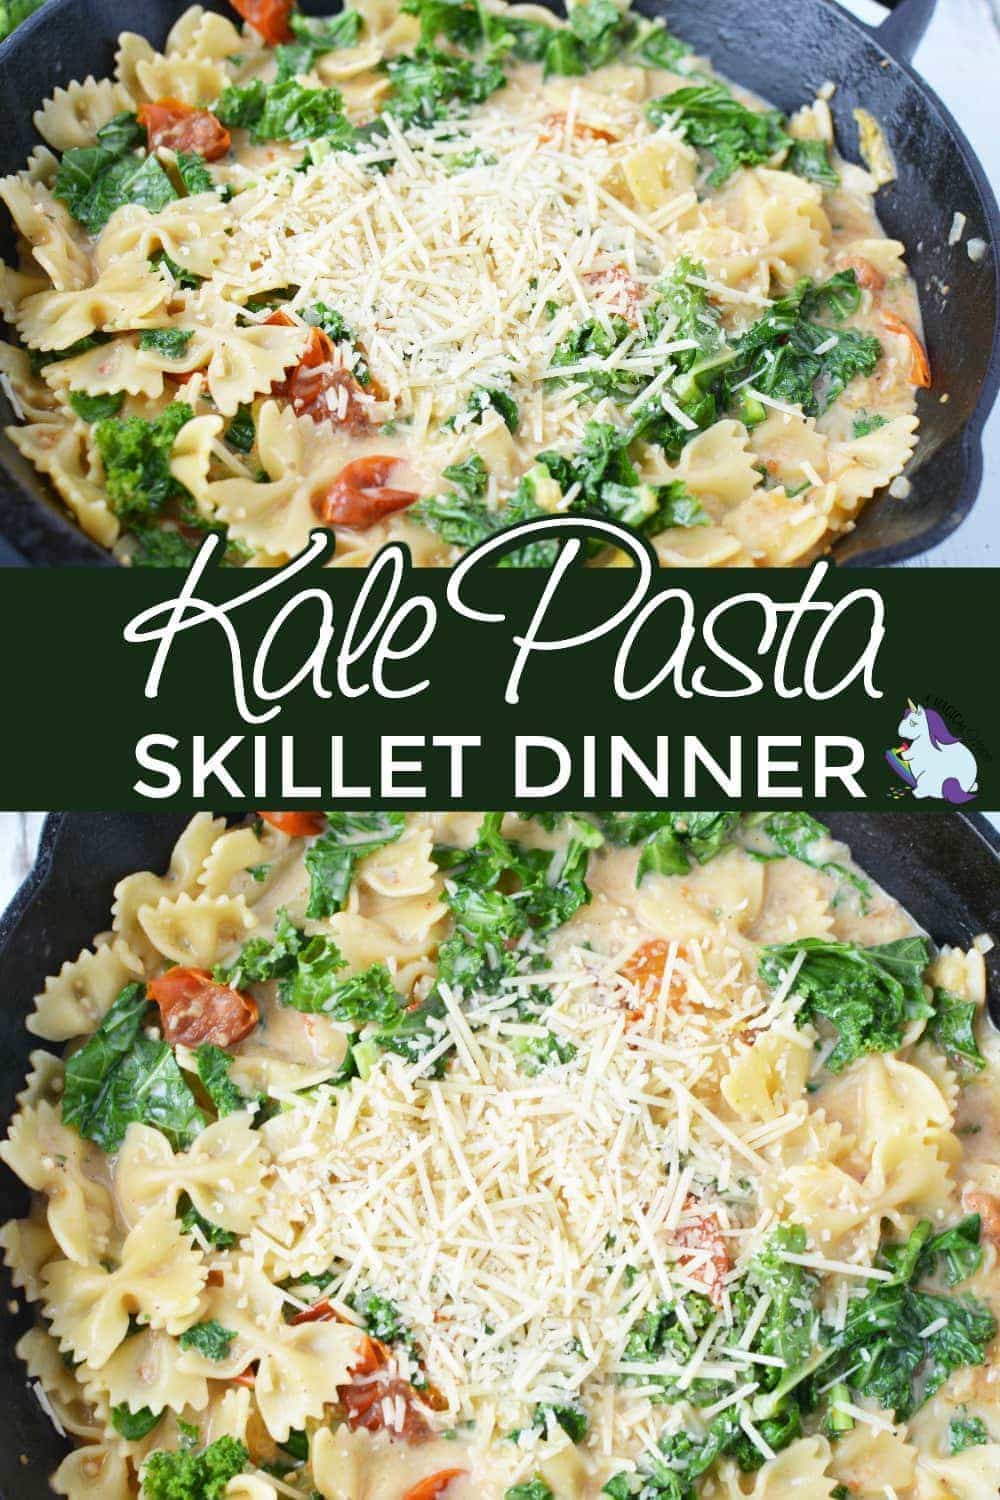 Kale pasta dinner in a skillet topped with Parmesan cheese. 